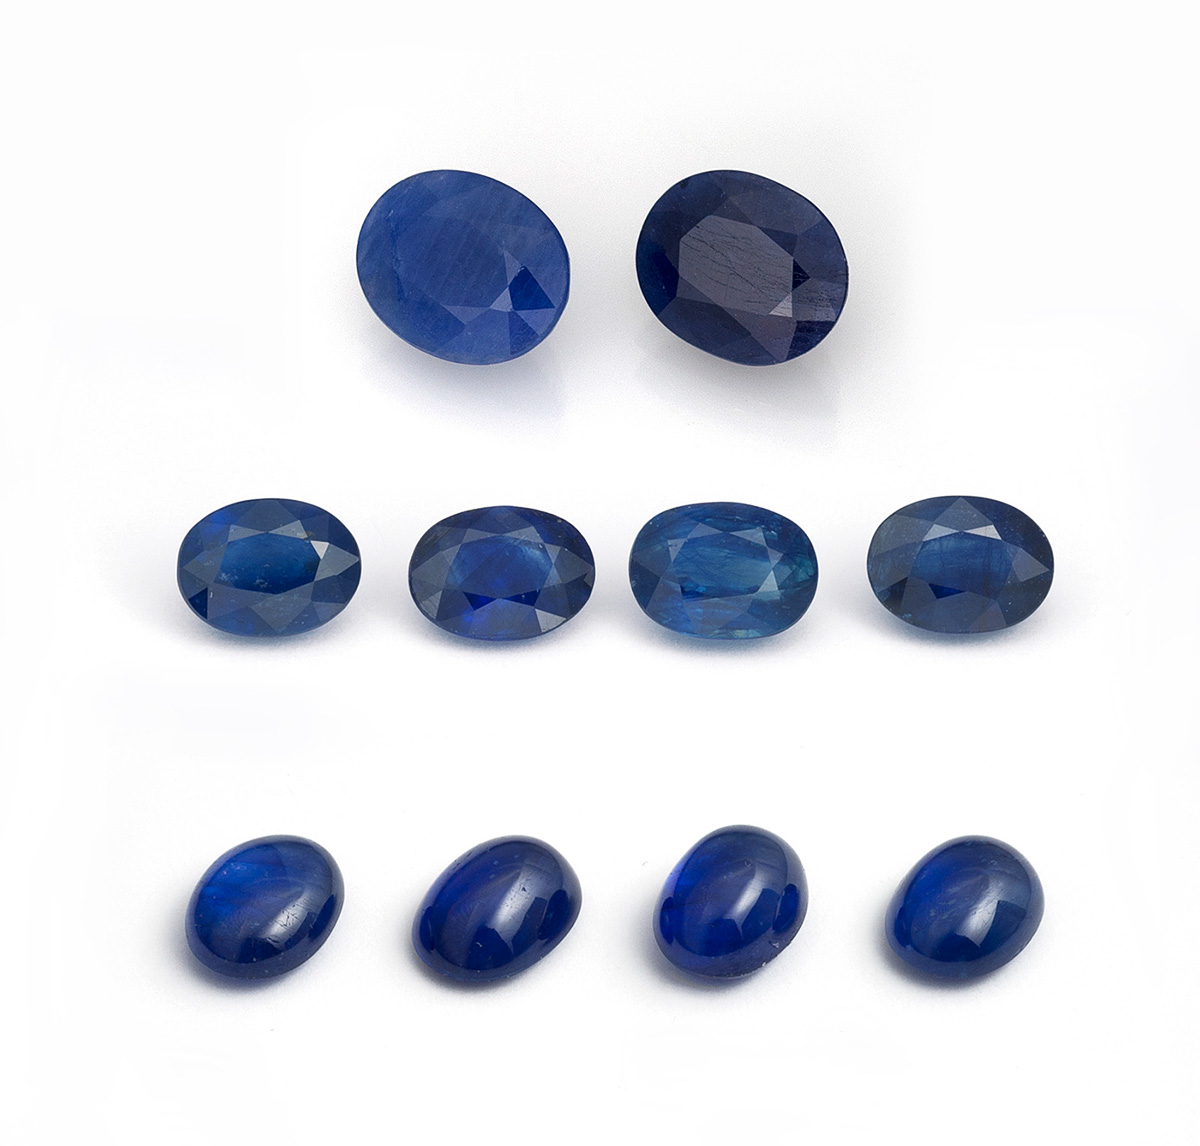 Figure 2. Two first-generation cobalt-doped glass-filled sapphires (top row; 3.49 & 3.37 ct), along with eight latest-generation cobalt-doped glass-filled sapphires ranging from 1.50–2.25 ct each that were tested as part of this study. Note the far lower clarity of the first-generation stones. (Photo: Lotus Gemology's Wimon Manorotkul).